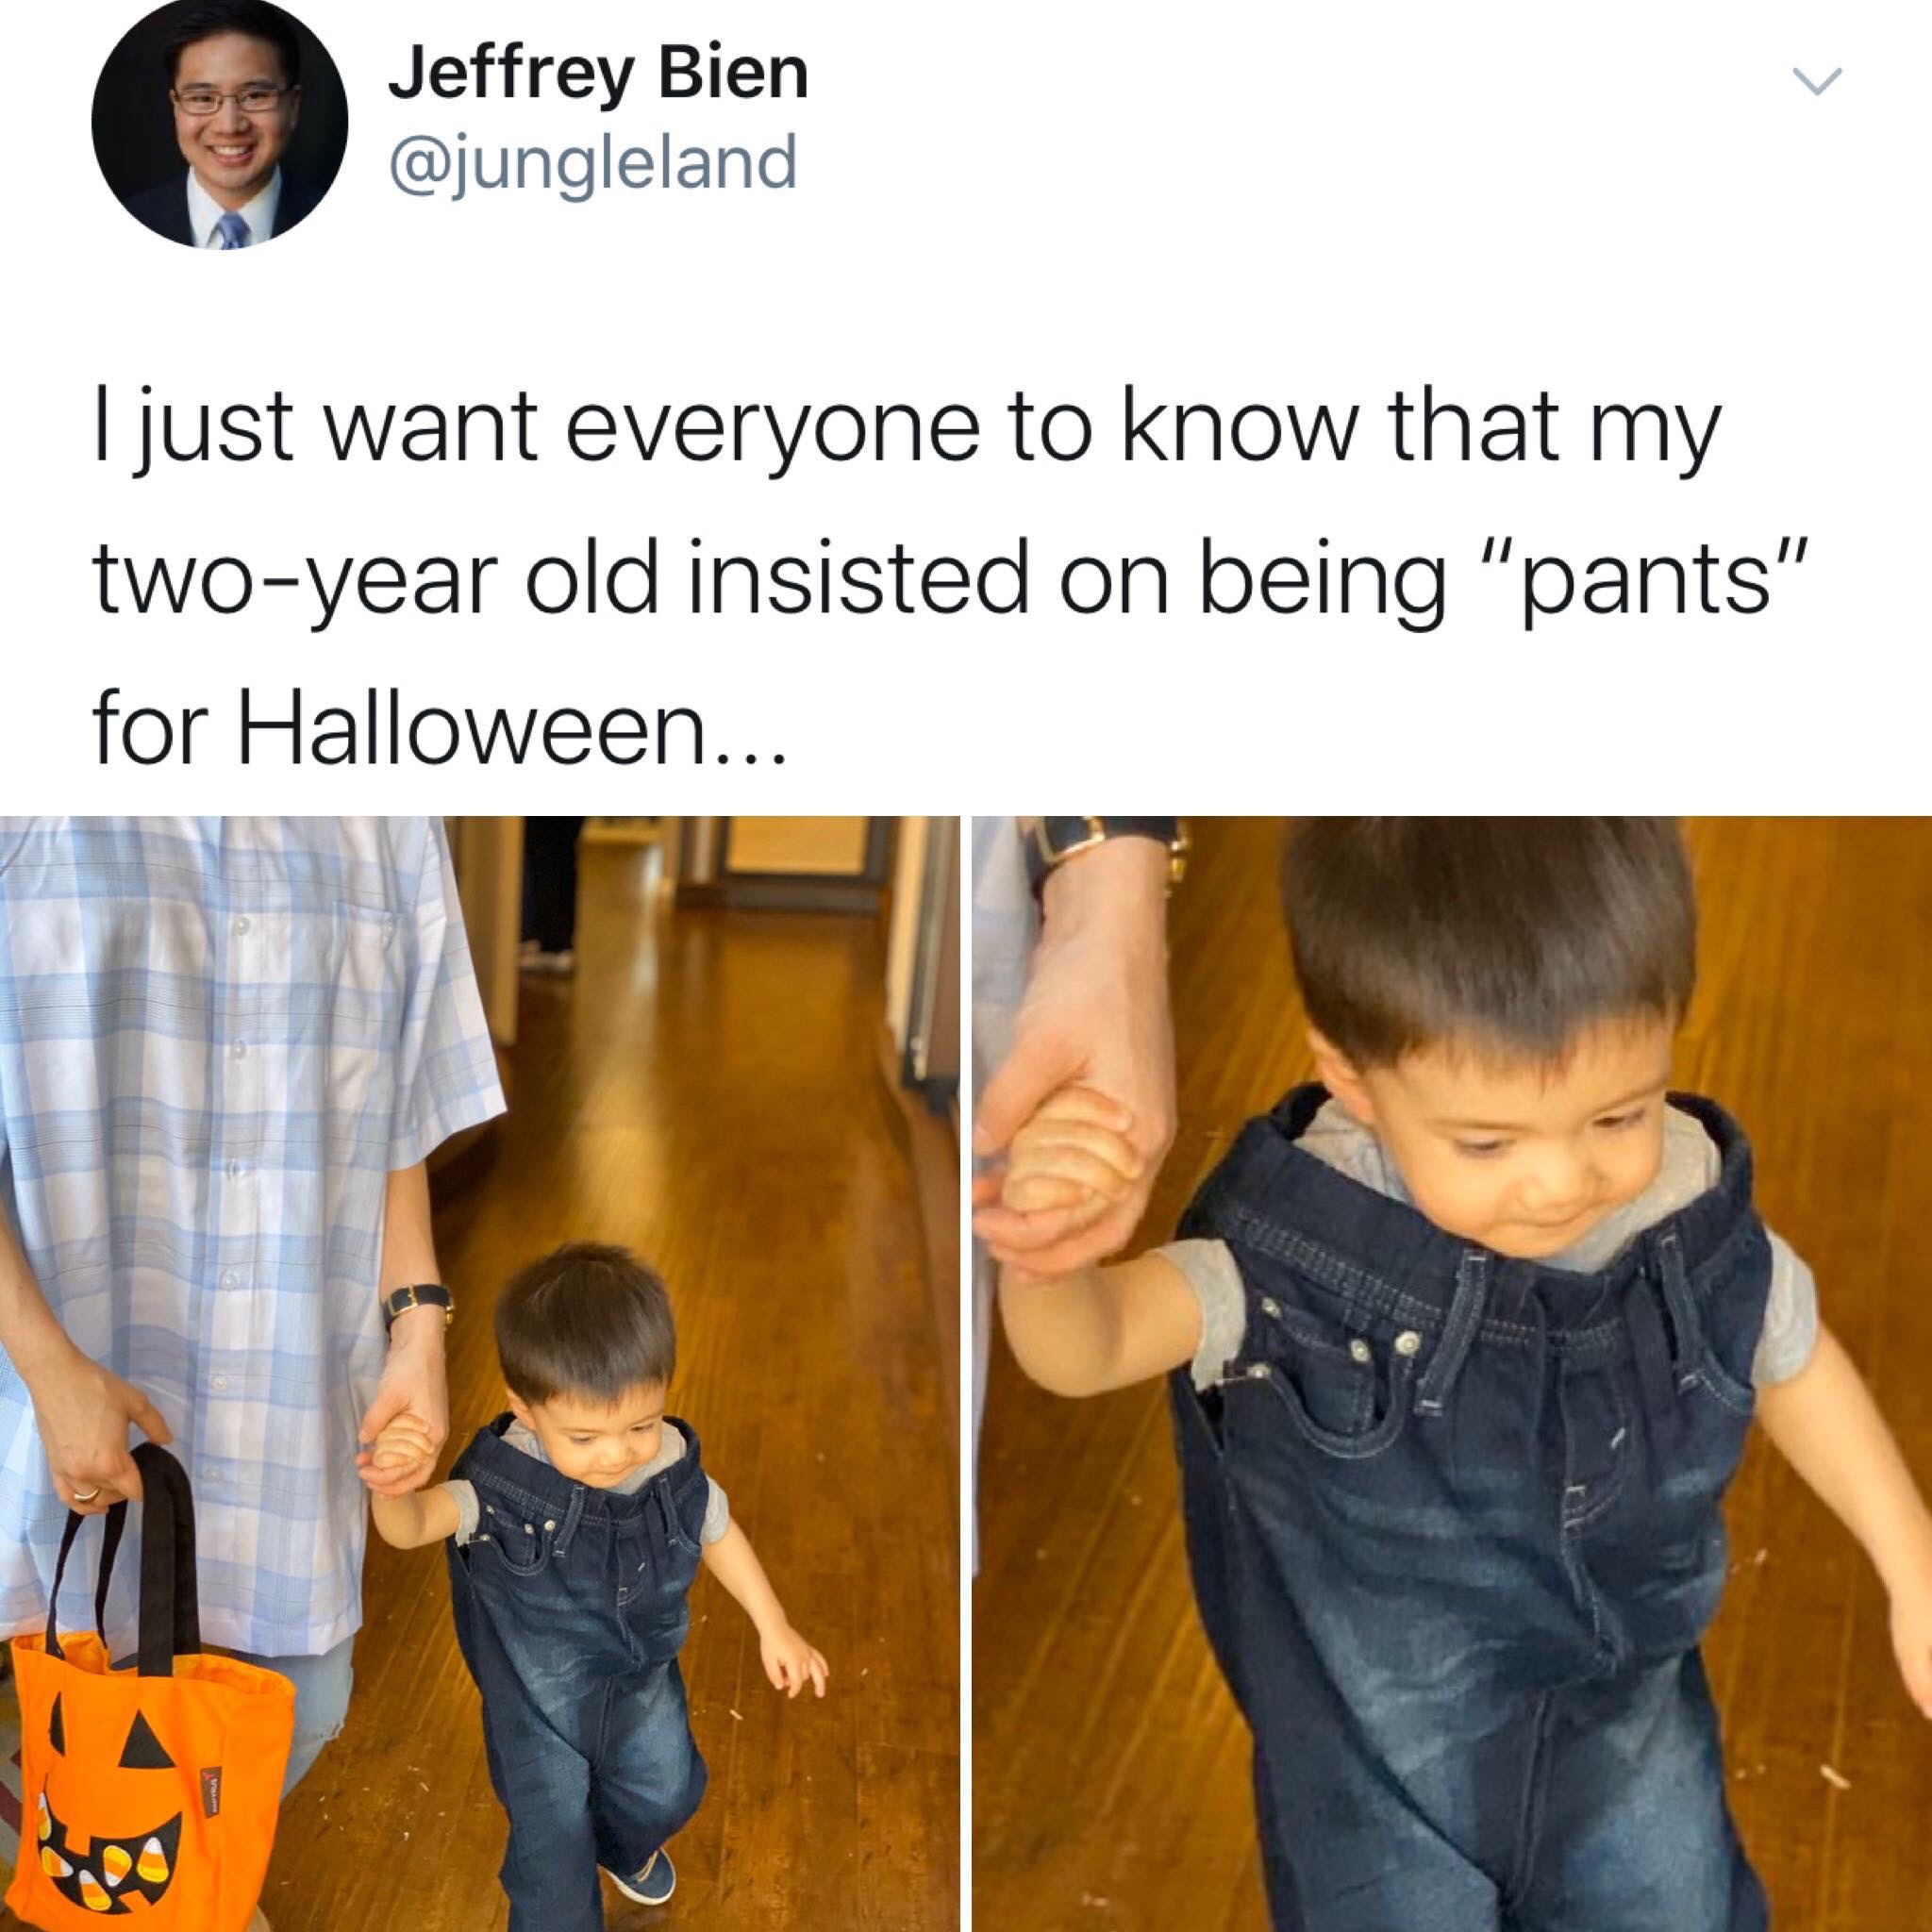 two year old pants halloween - Jeffrey Bien I just want everyone to know that my twoyear old insisted on being "pants" for Halloween...